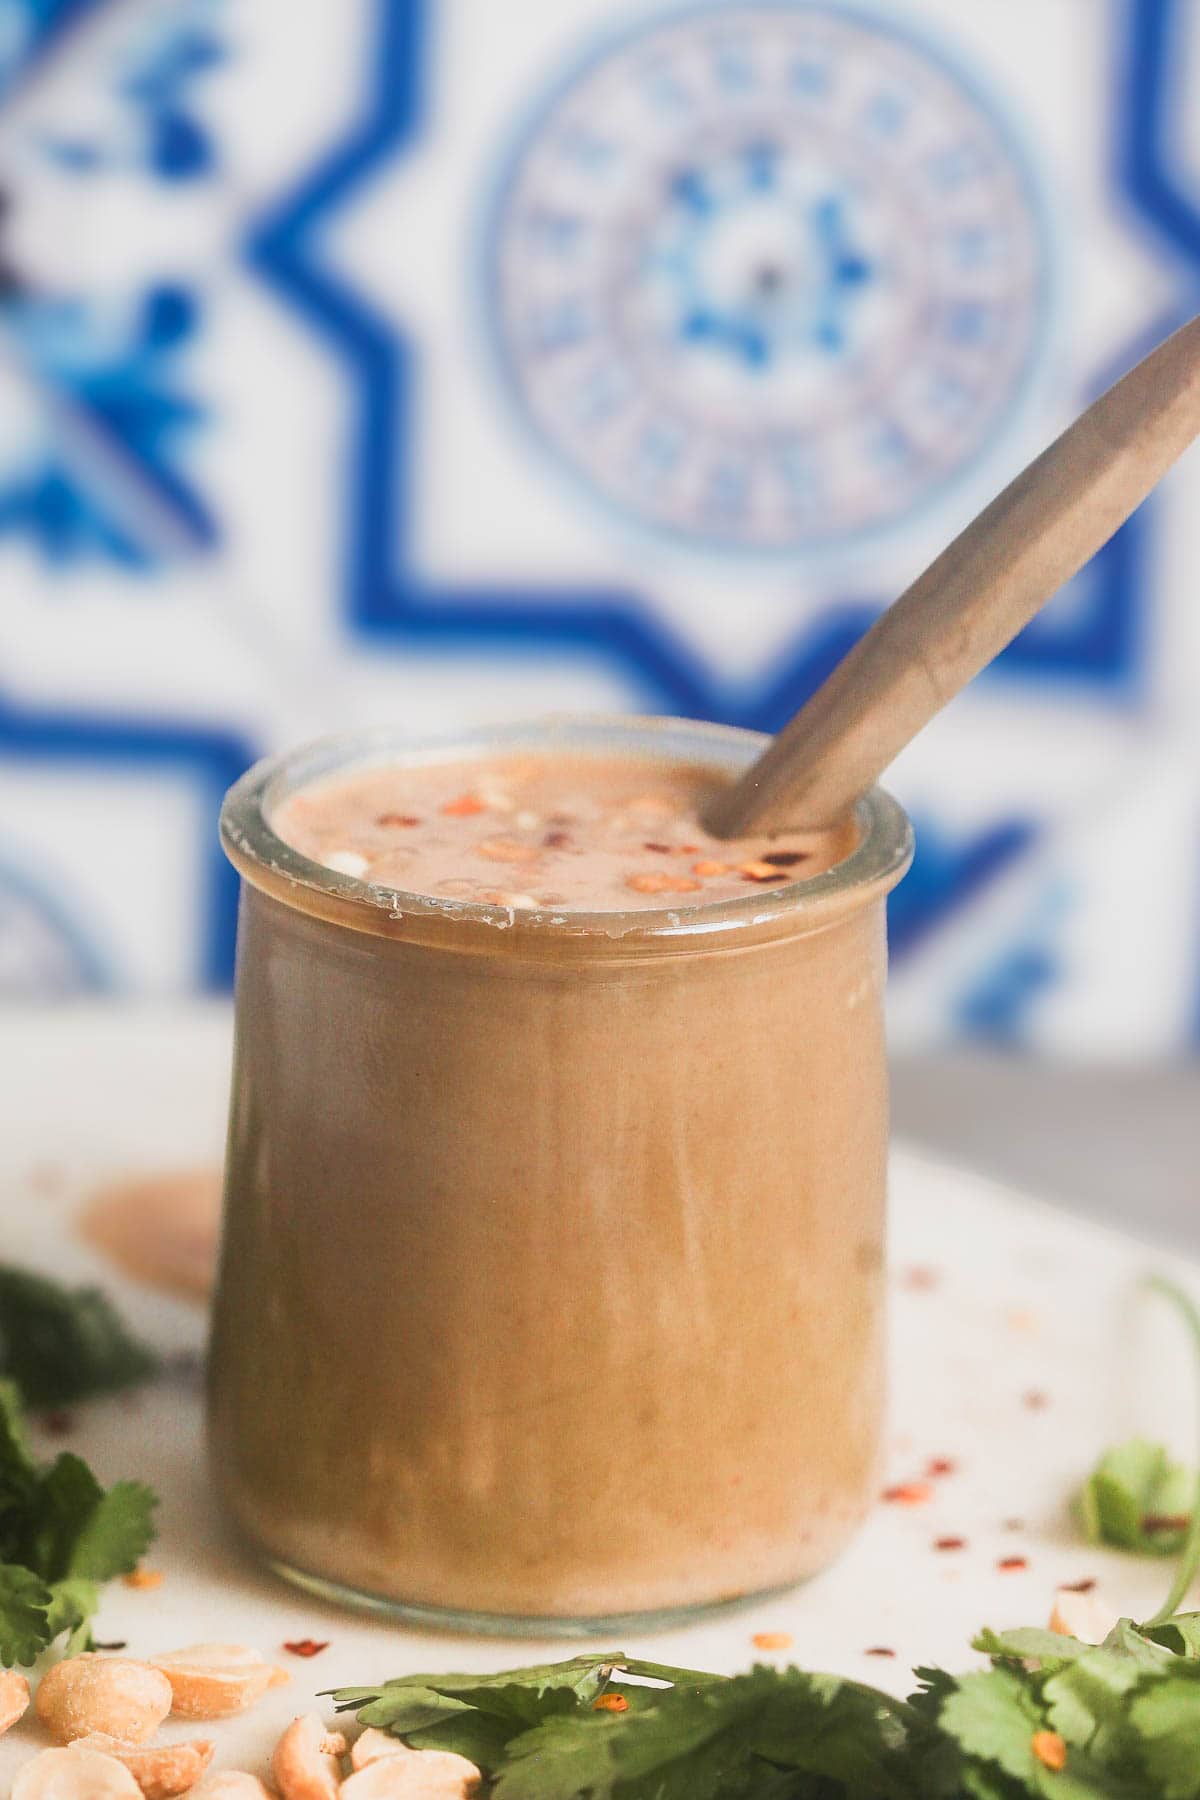 A small glass jar filled with homemade peanut sauce against a blue tile background. 